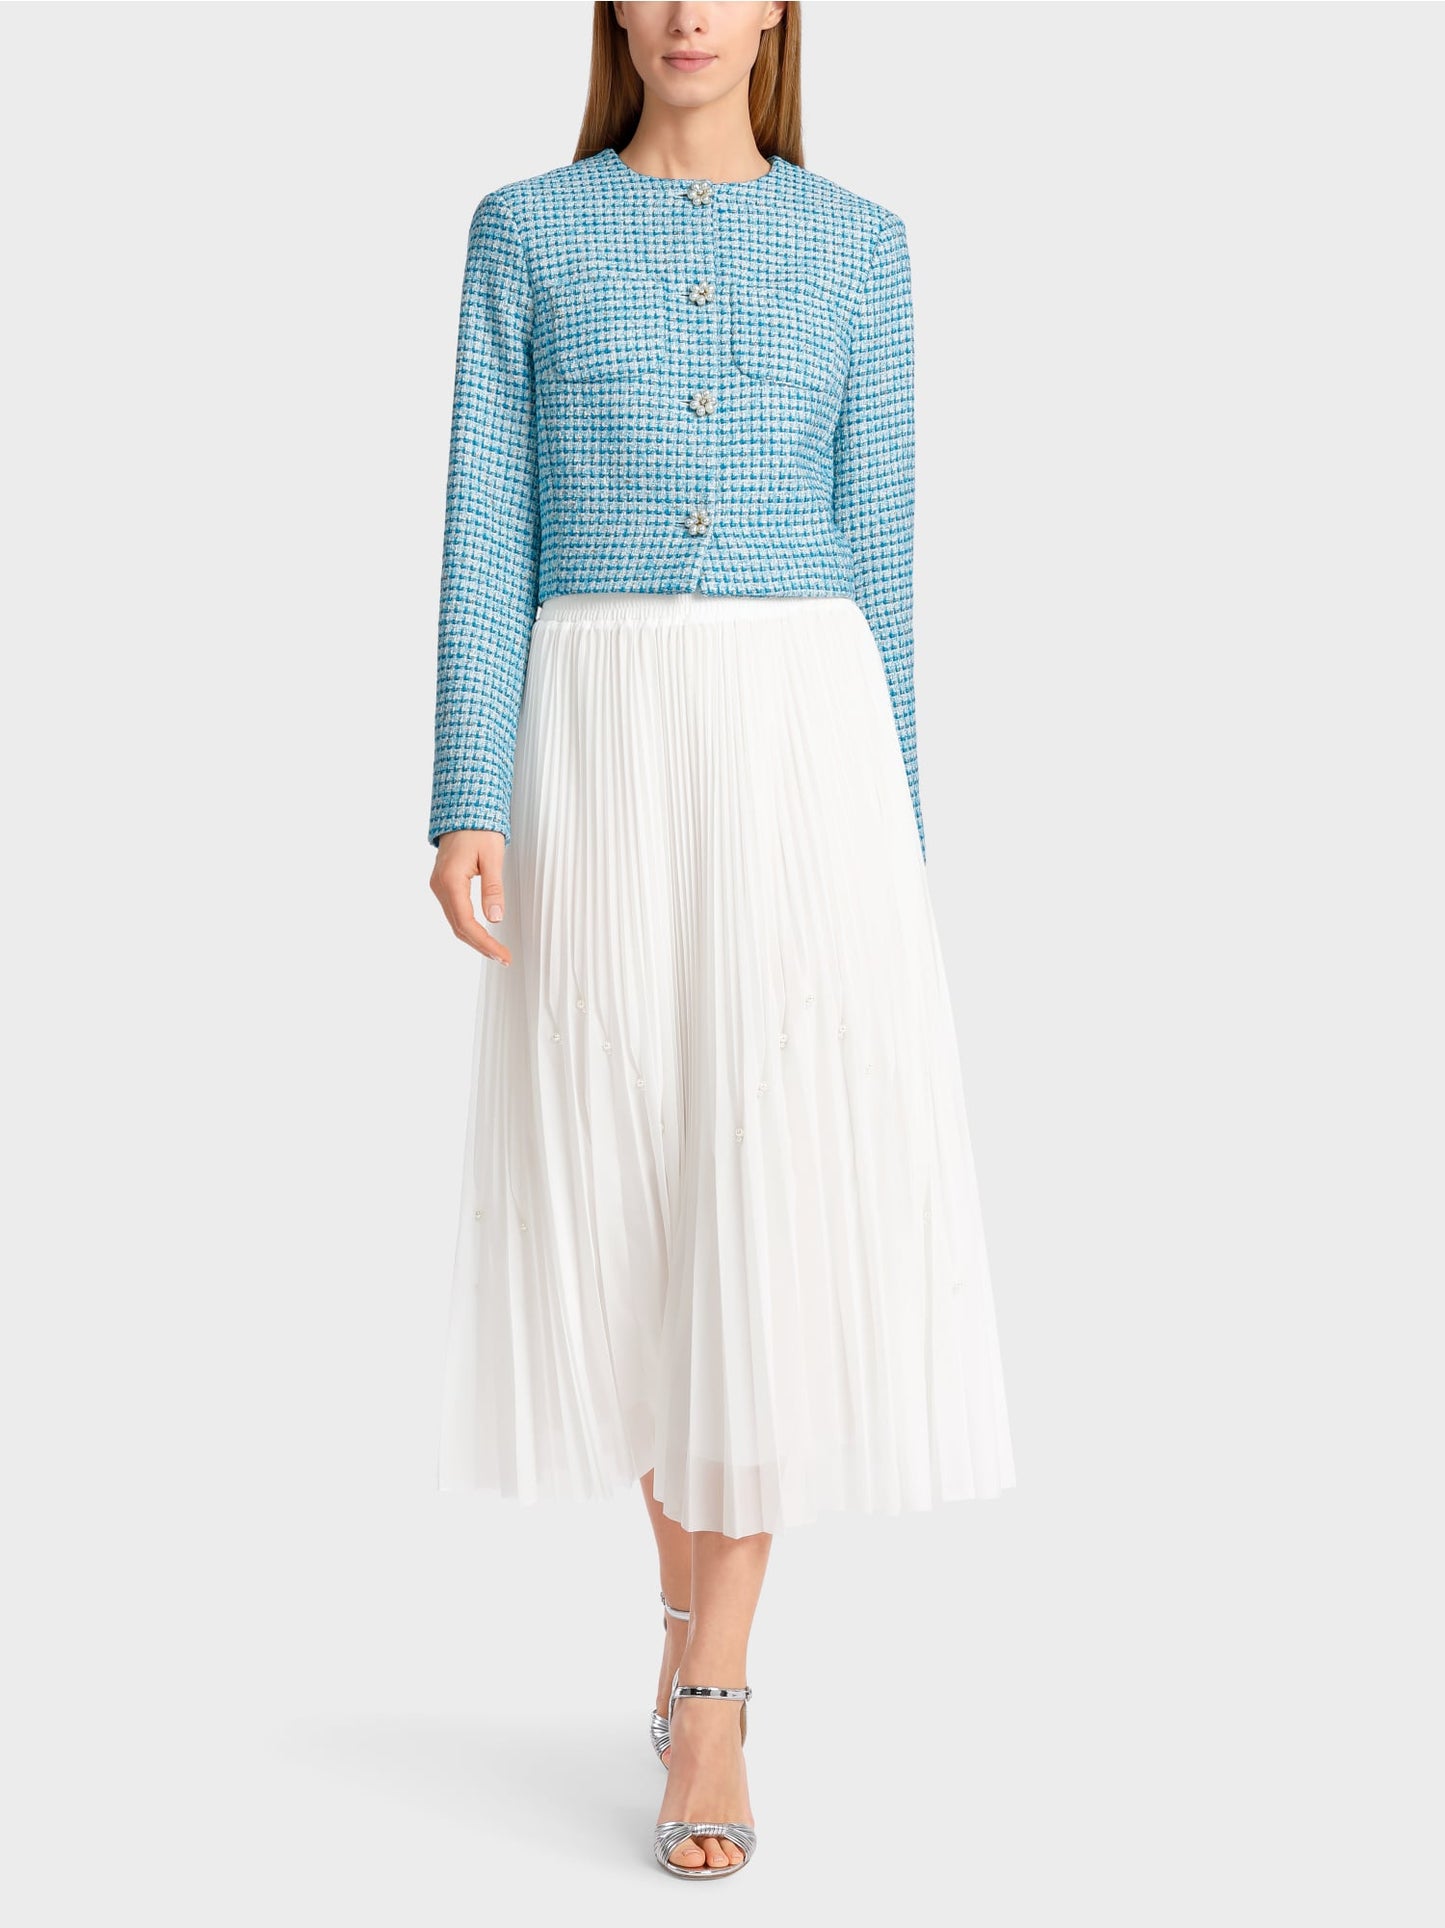 Pleated skirt with beads